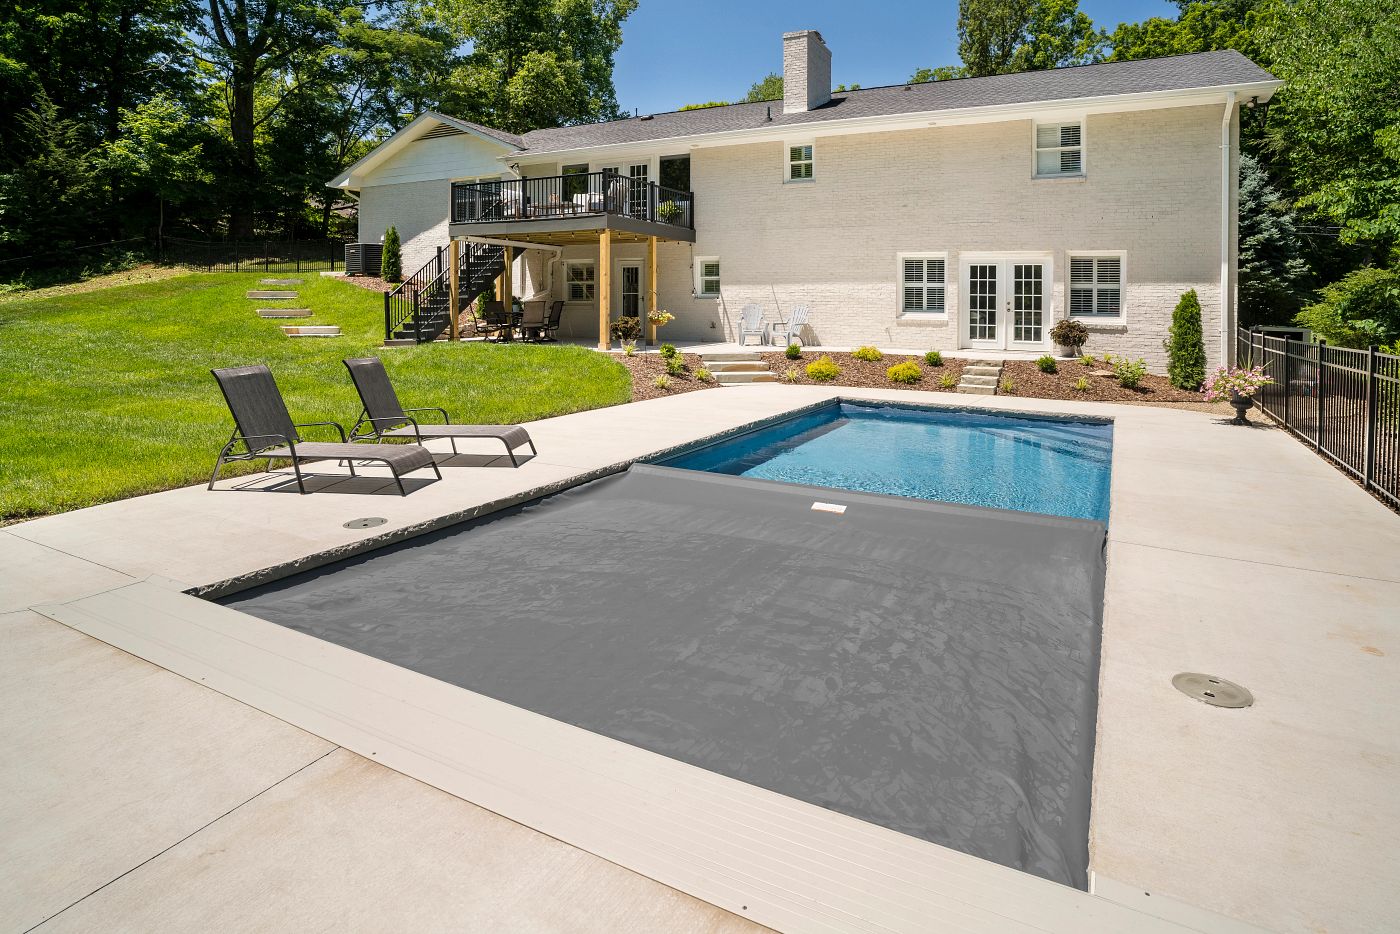 Fiberglass pool with automatic safety cover in a sloped Alabama backyard